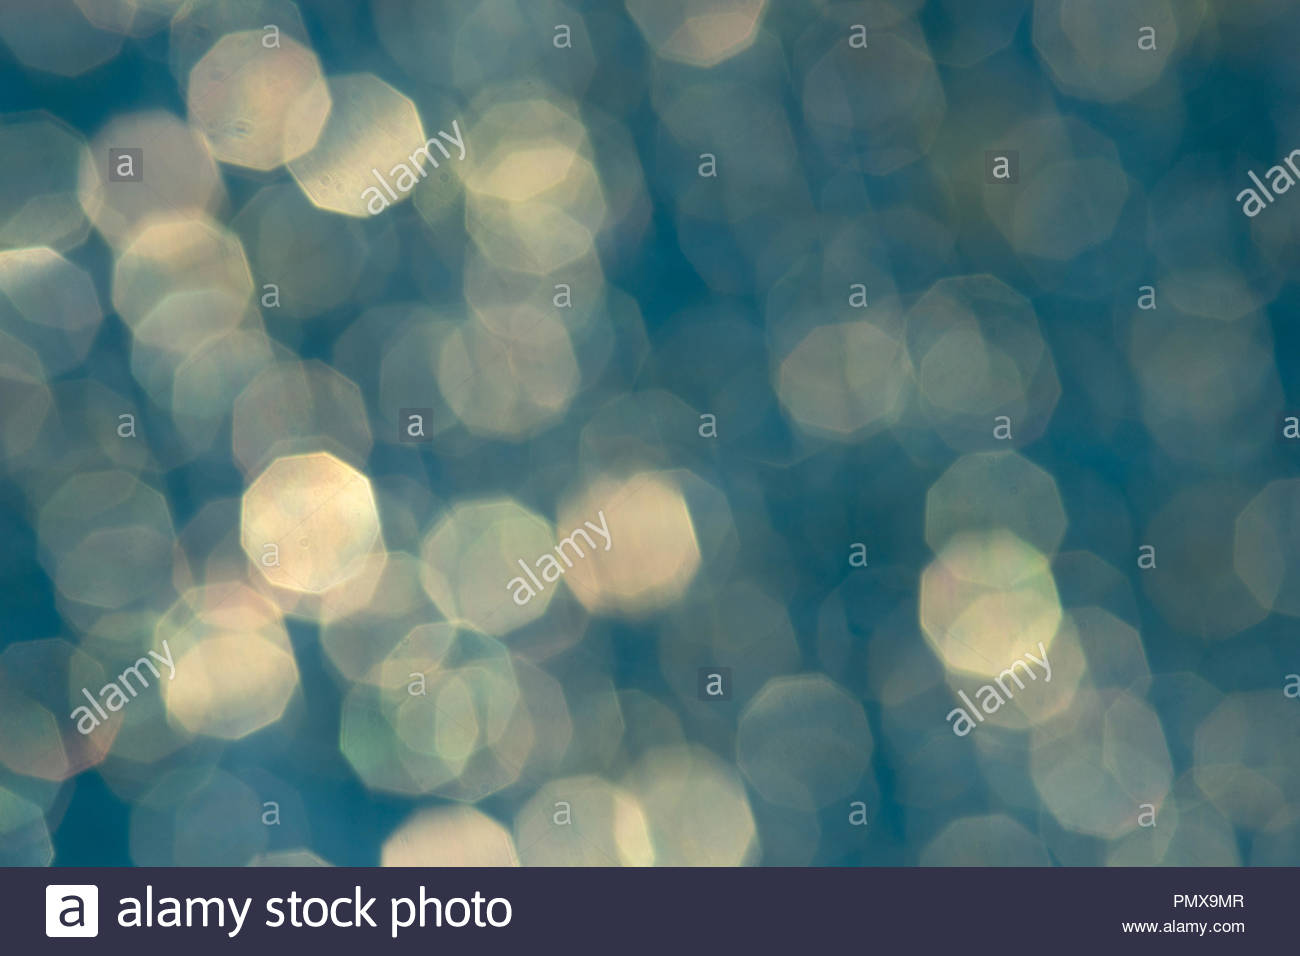 Blurry Photographic Background Of Soft Yellow And Bluish Colors